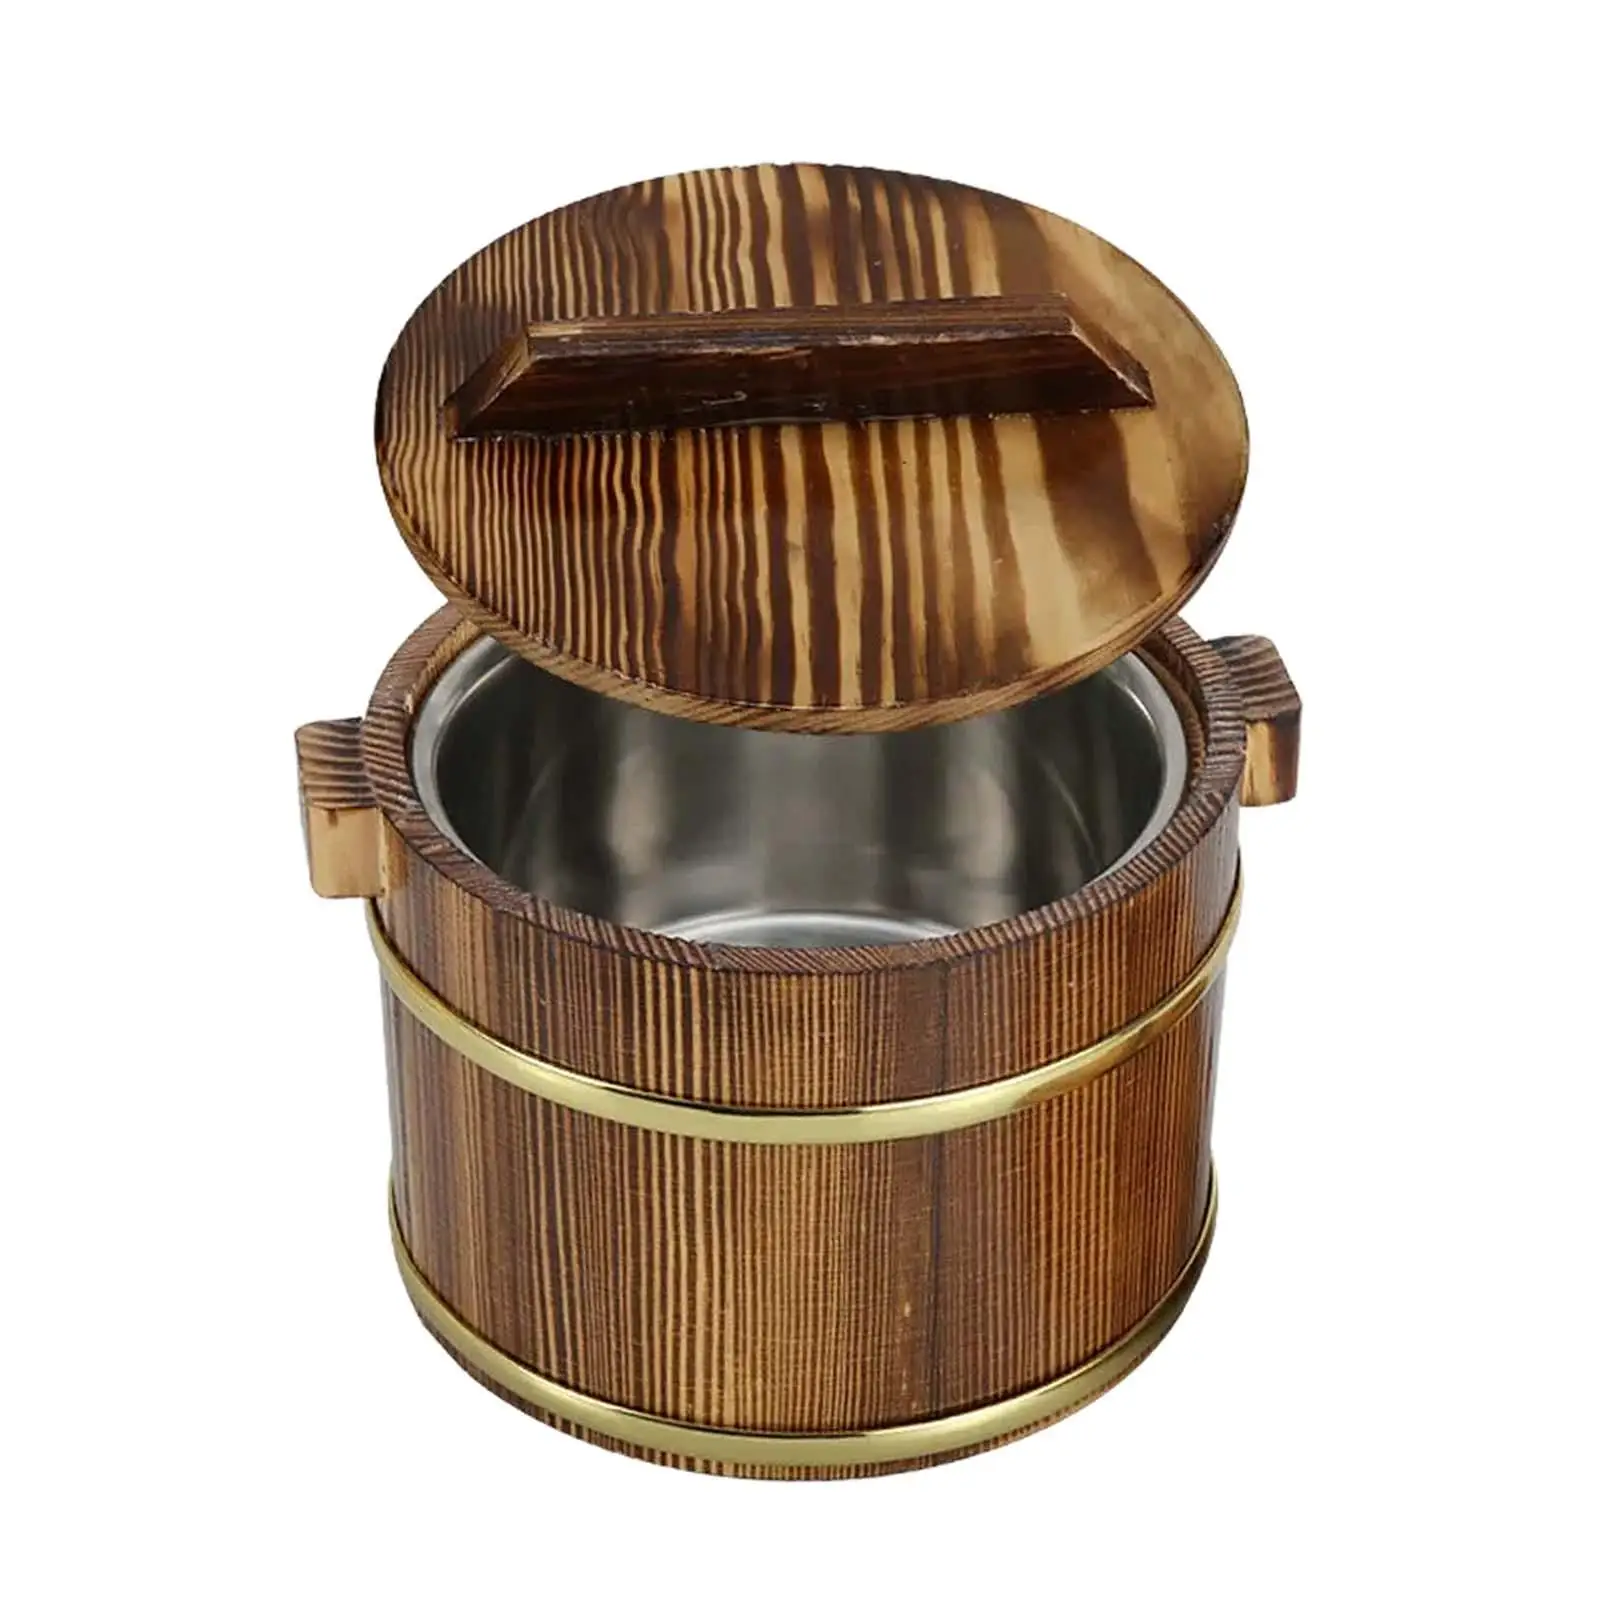 Wooden Rice Bucket Reusable Practical Rice Mixing Tub with Lid for Cooking